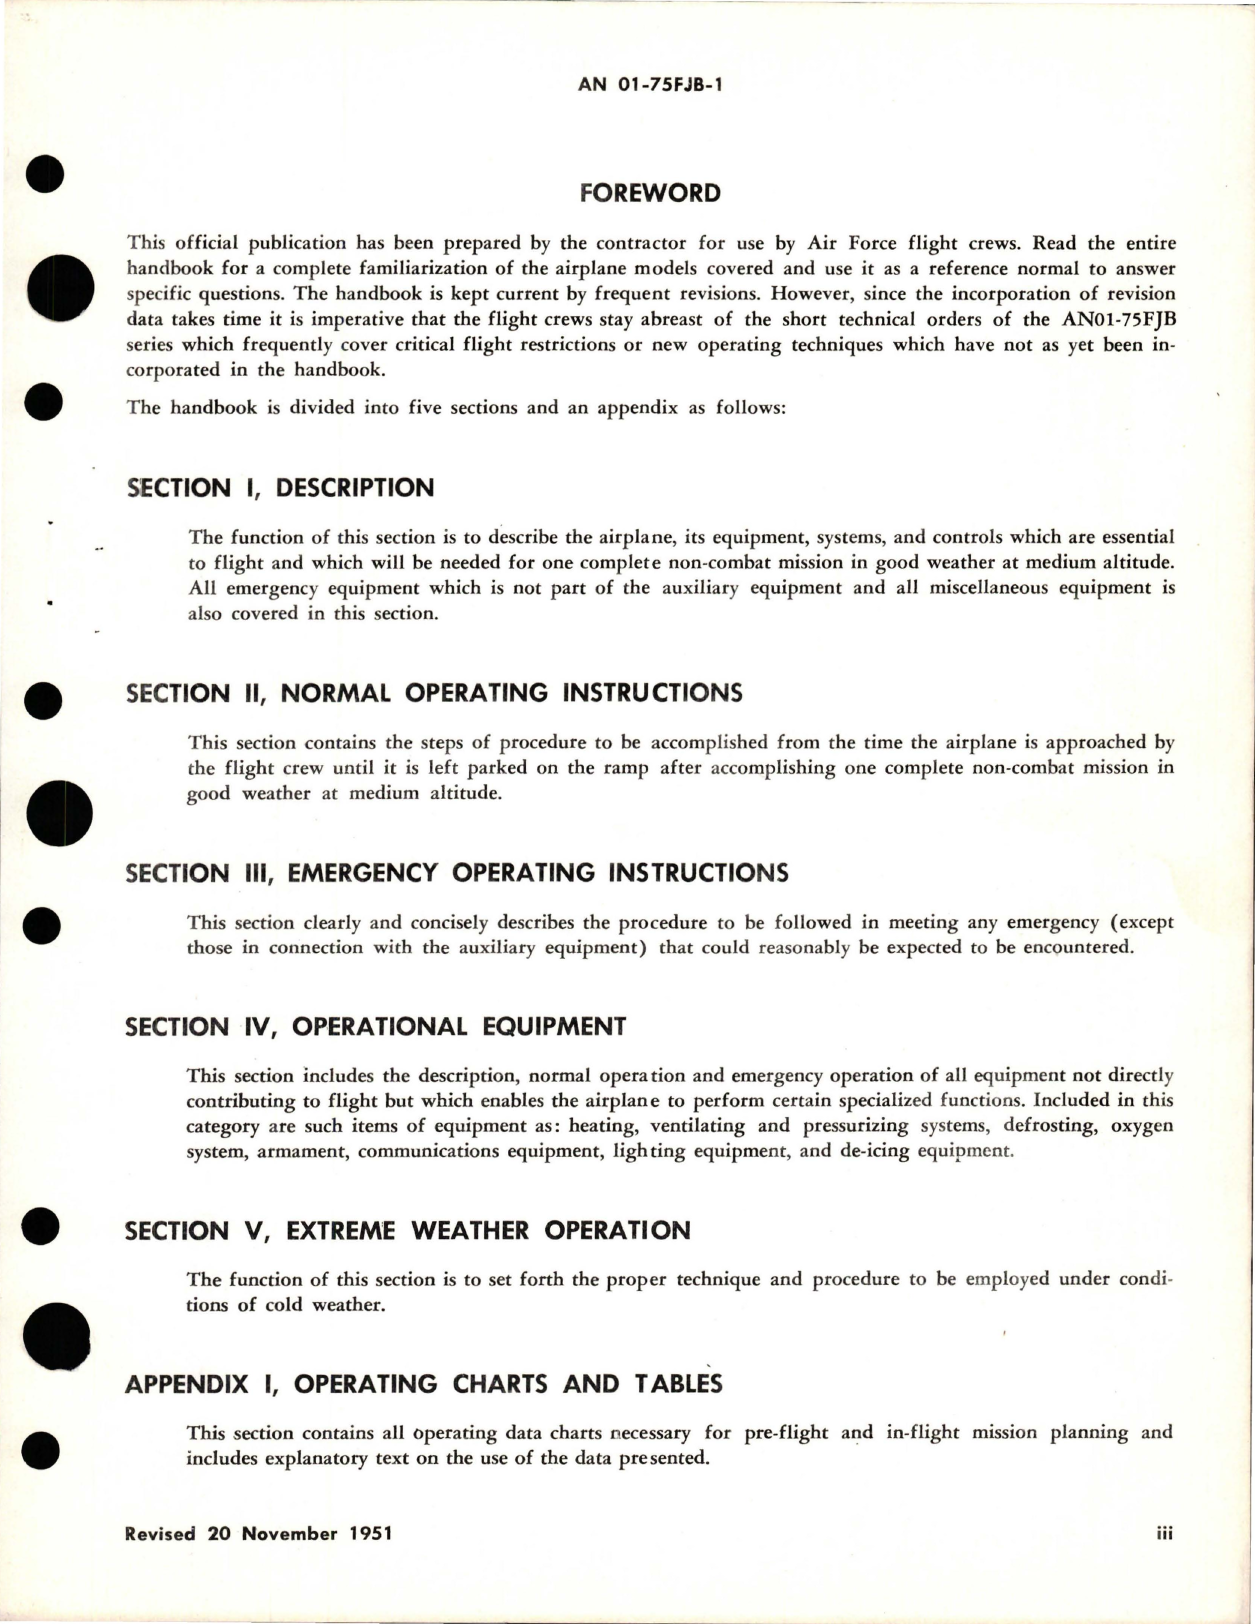 Sample page 5 from AirCorps Library document: Flight Operating Instructions for F-80B, F-80C, and TV-1